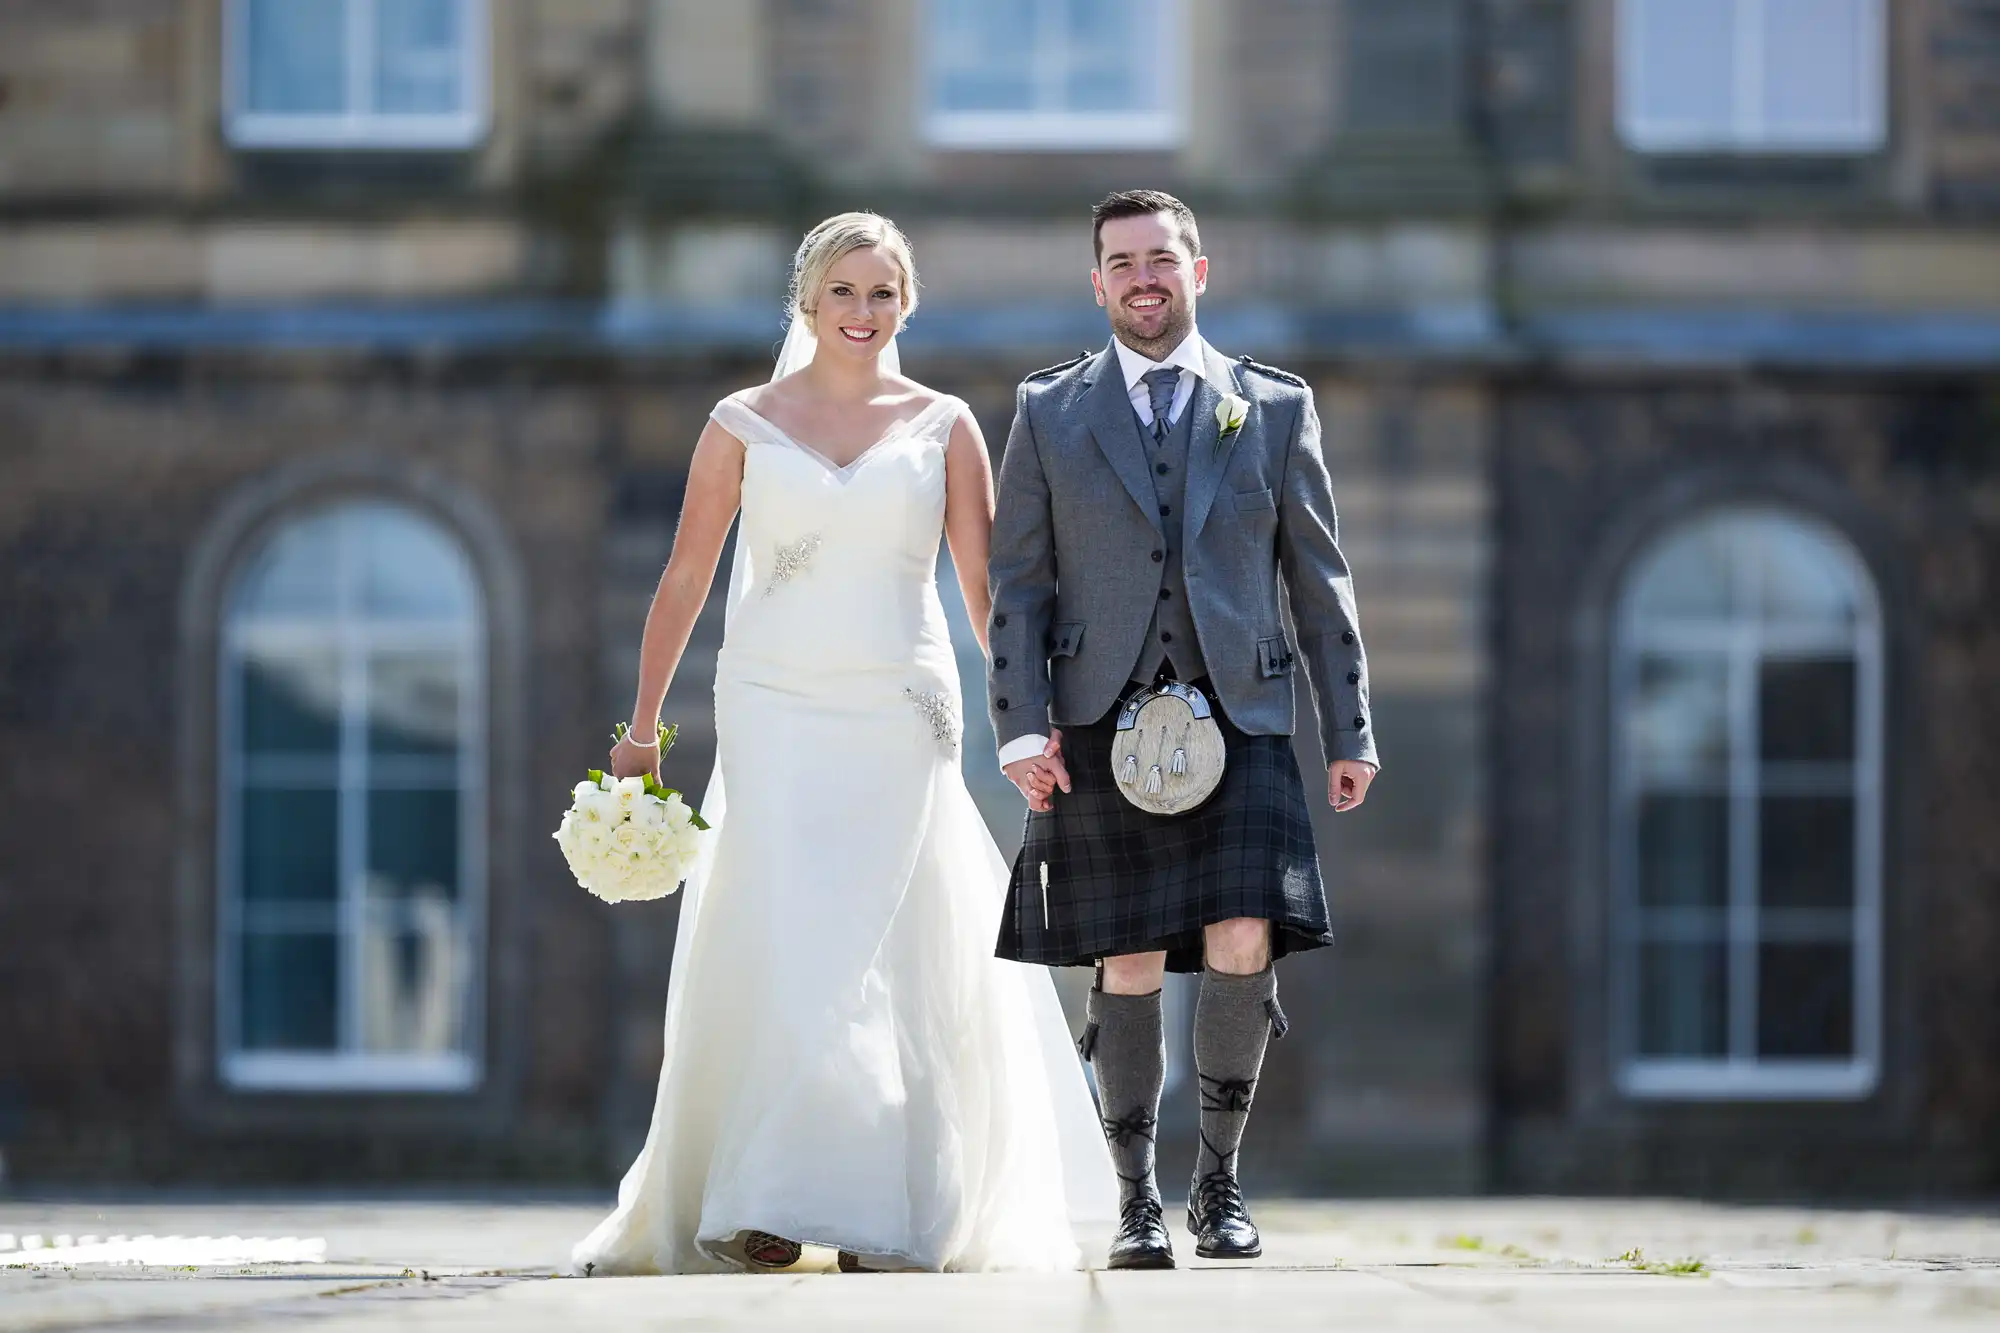 A couple dressed in wedding attire, the woman in a white gown holding a bouquet, and the man in a kilt and jacket, walk hand-in-hand outside a building with large windows.